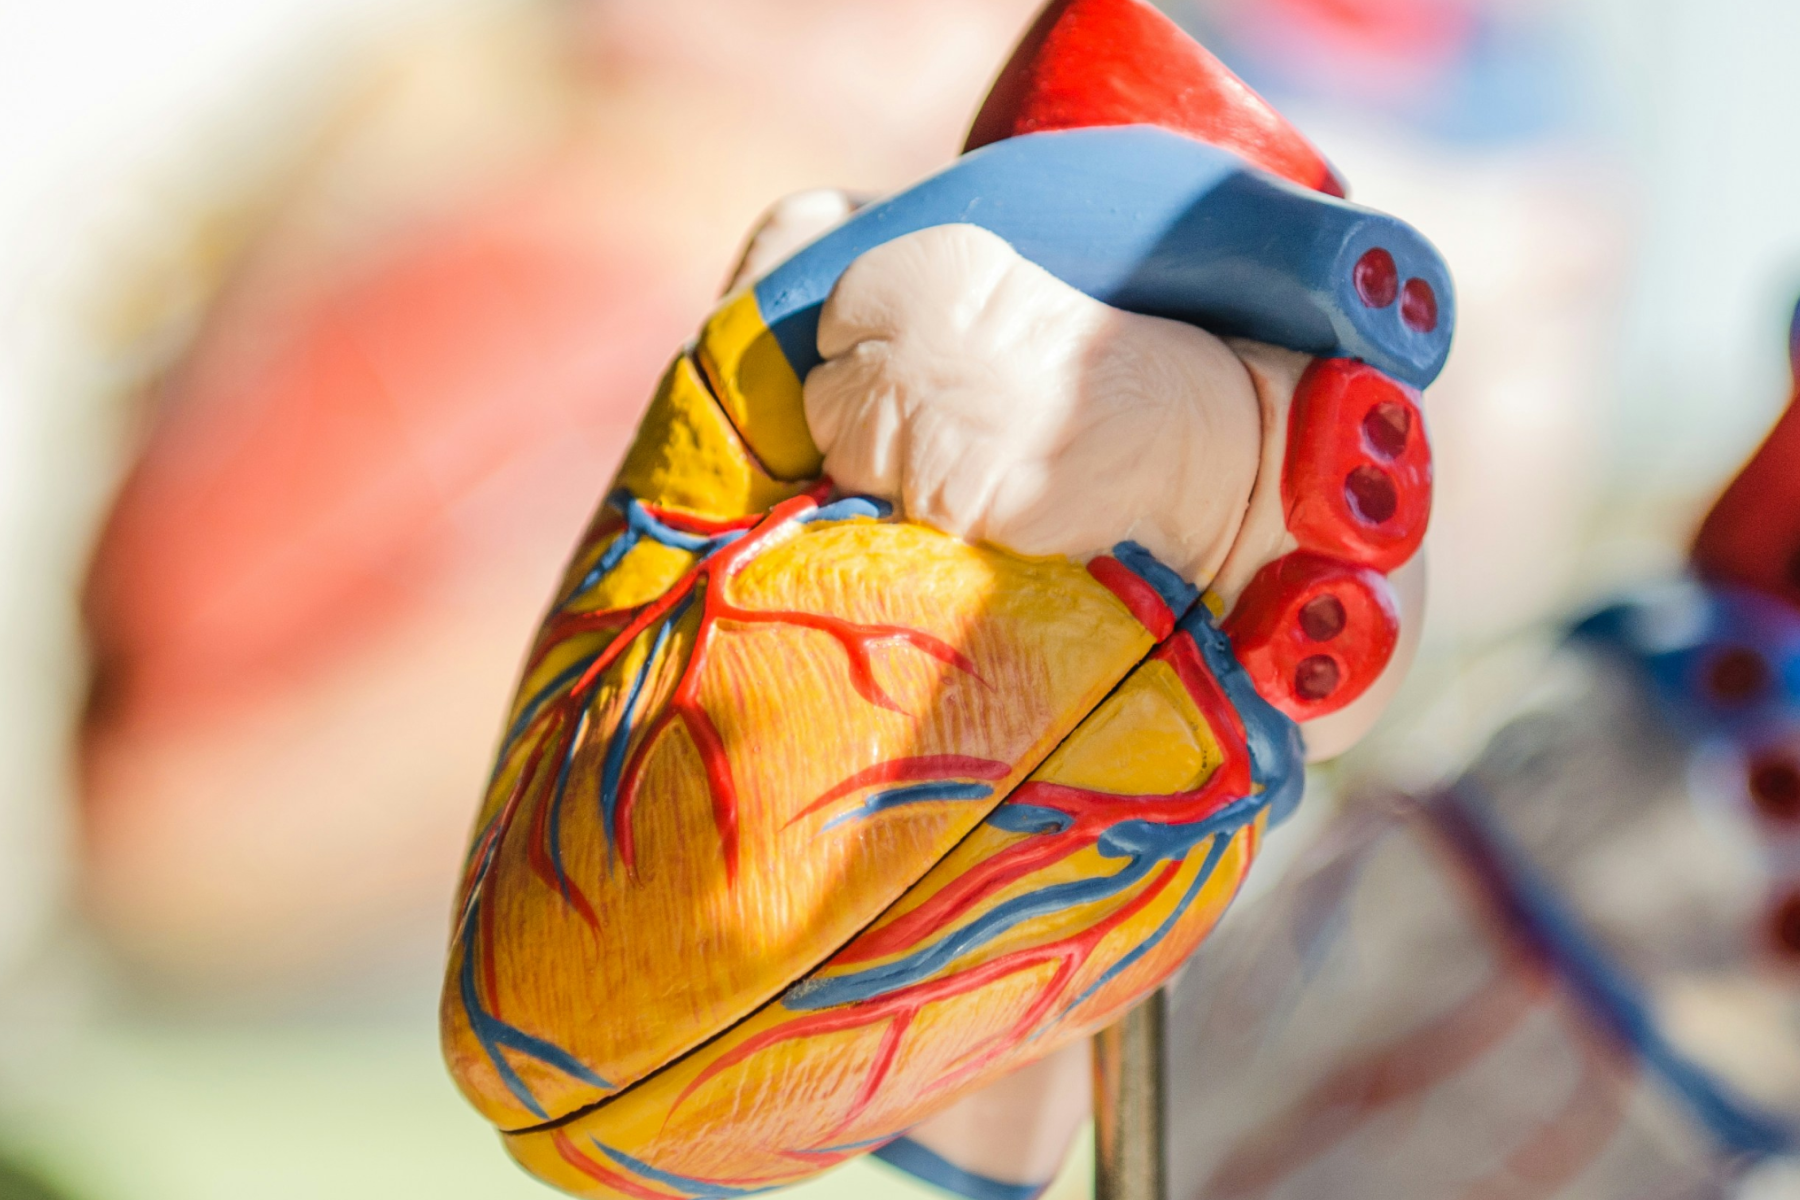 anatomical model of a heart